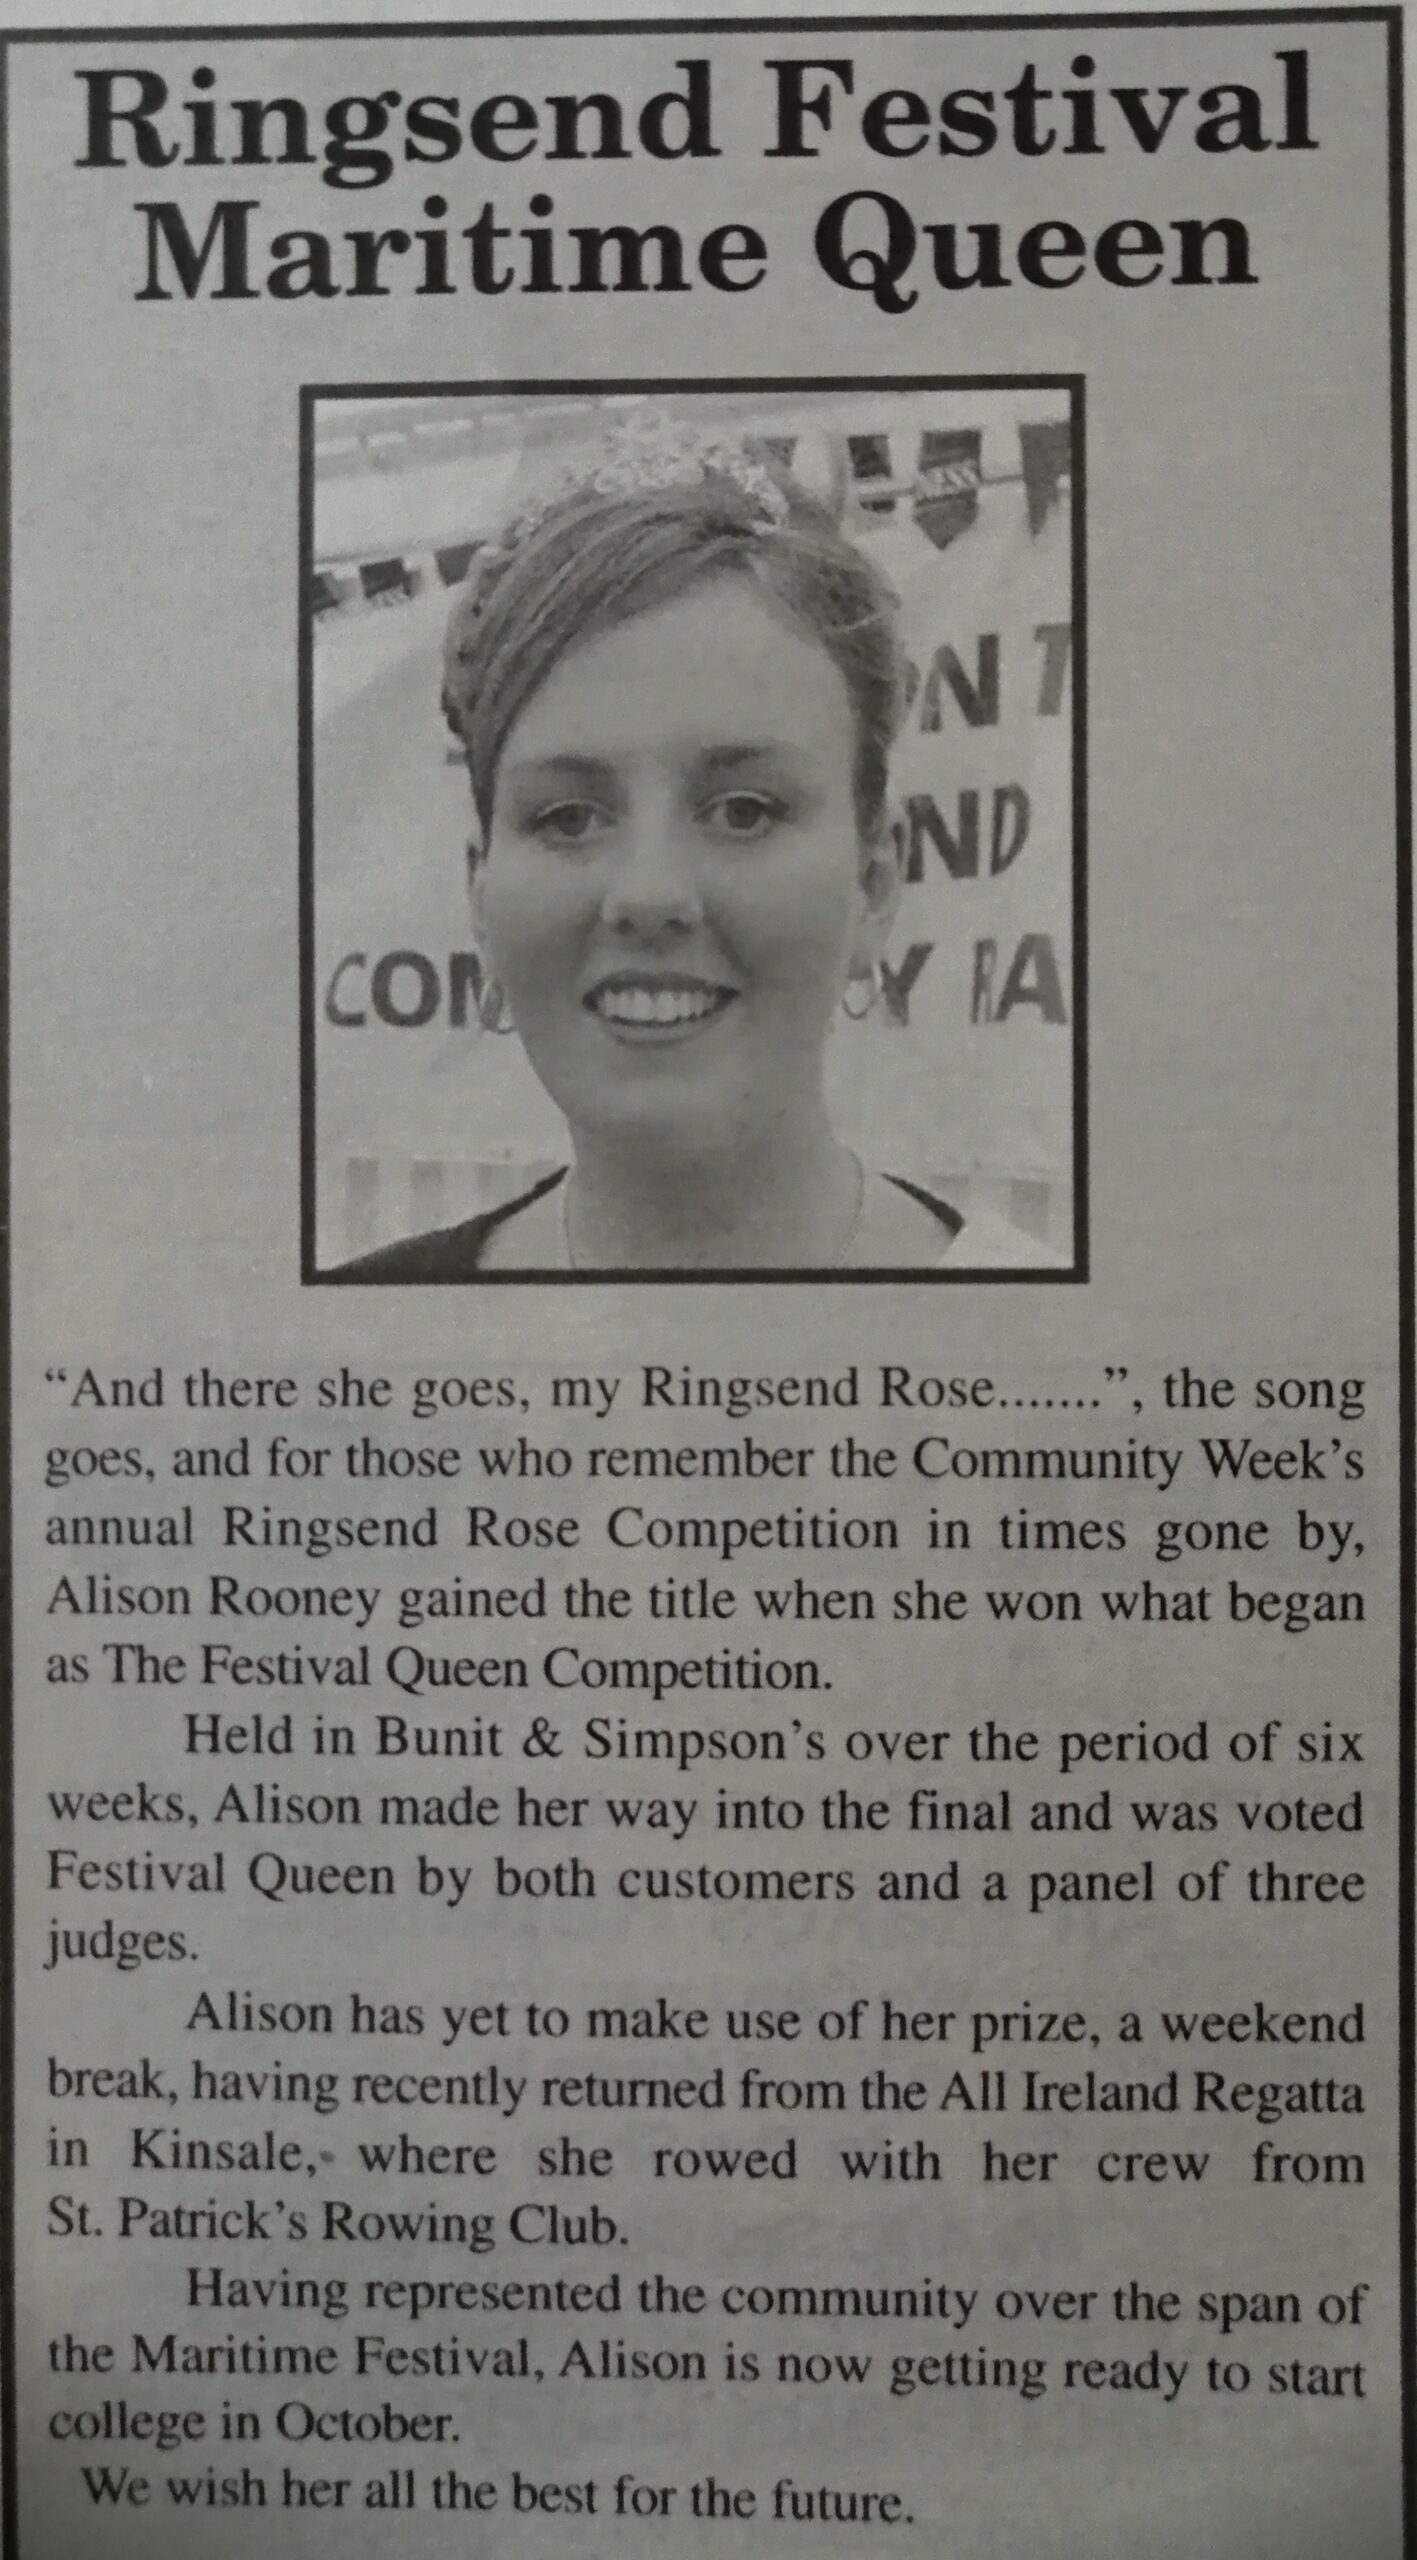 Alison Rooney won the Festival Queen Title, our Ringsend Rose